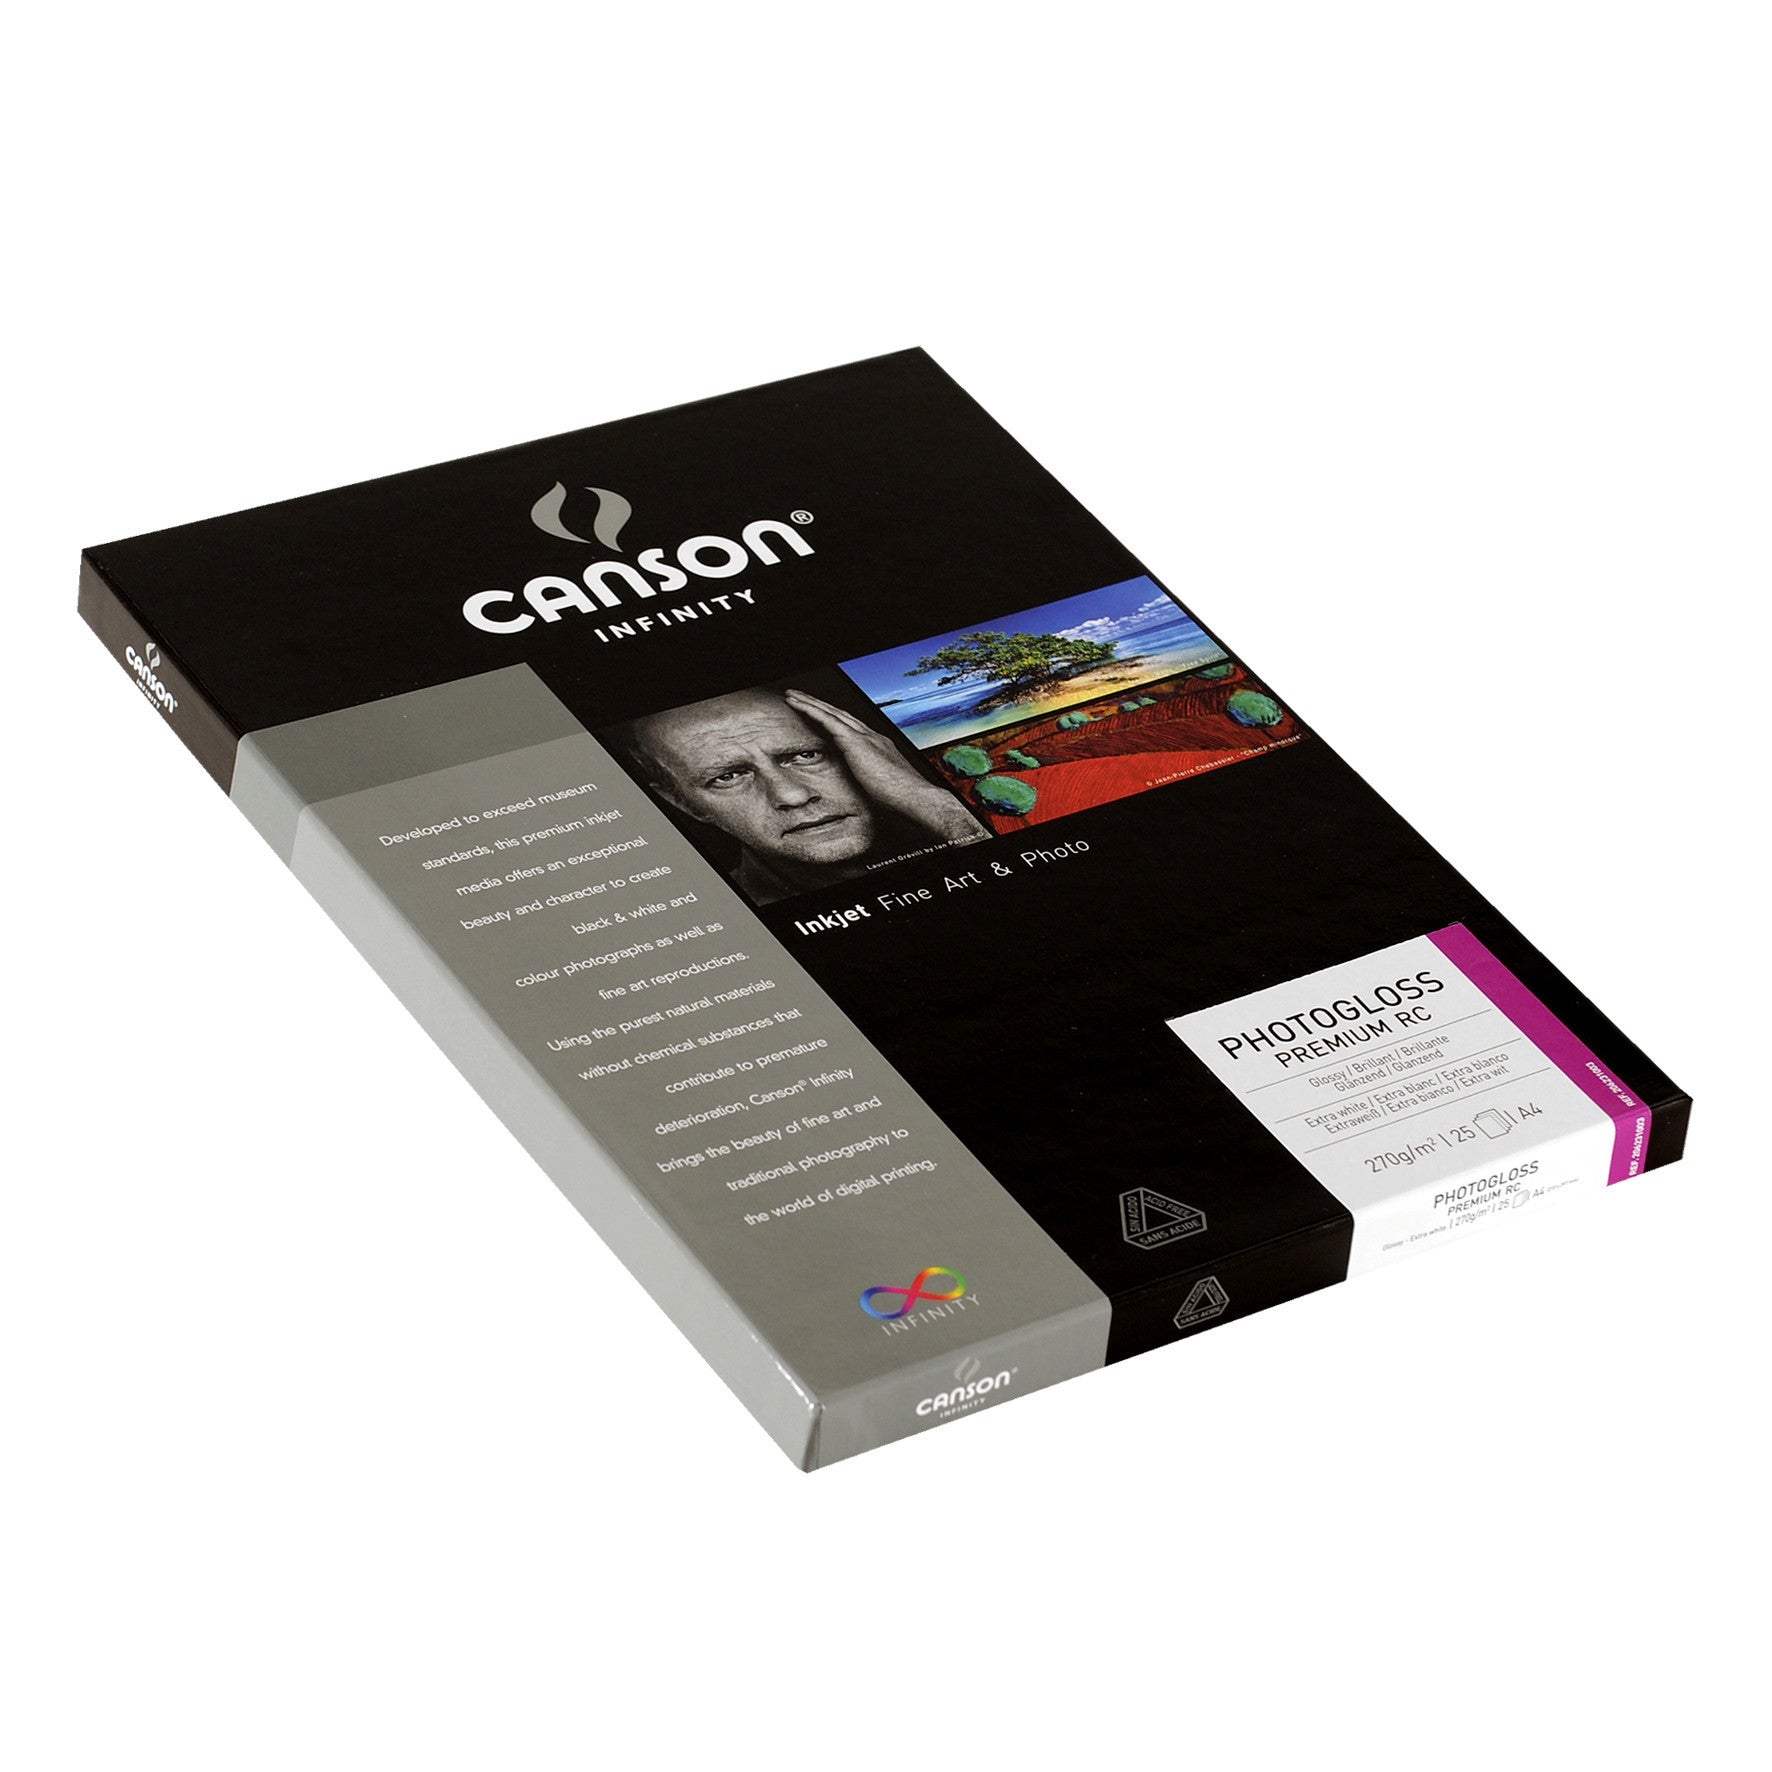 Canson Infinity Photo Gloss Premium RC - 270gsm - A4 - 25 sheets - Wall Your Photos